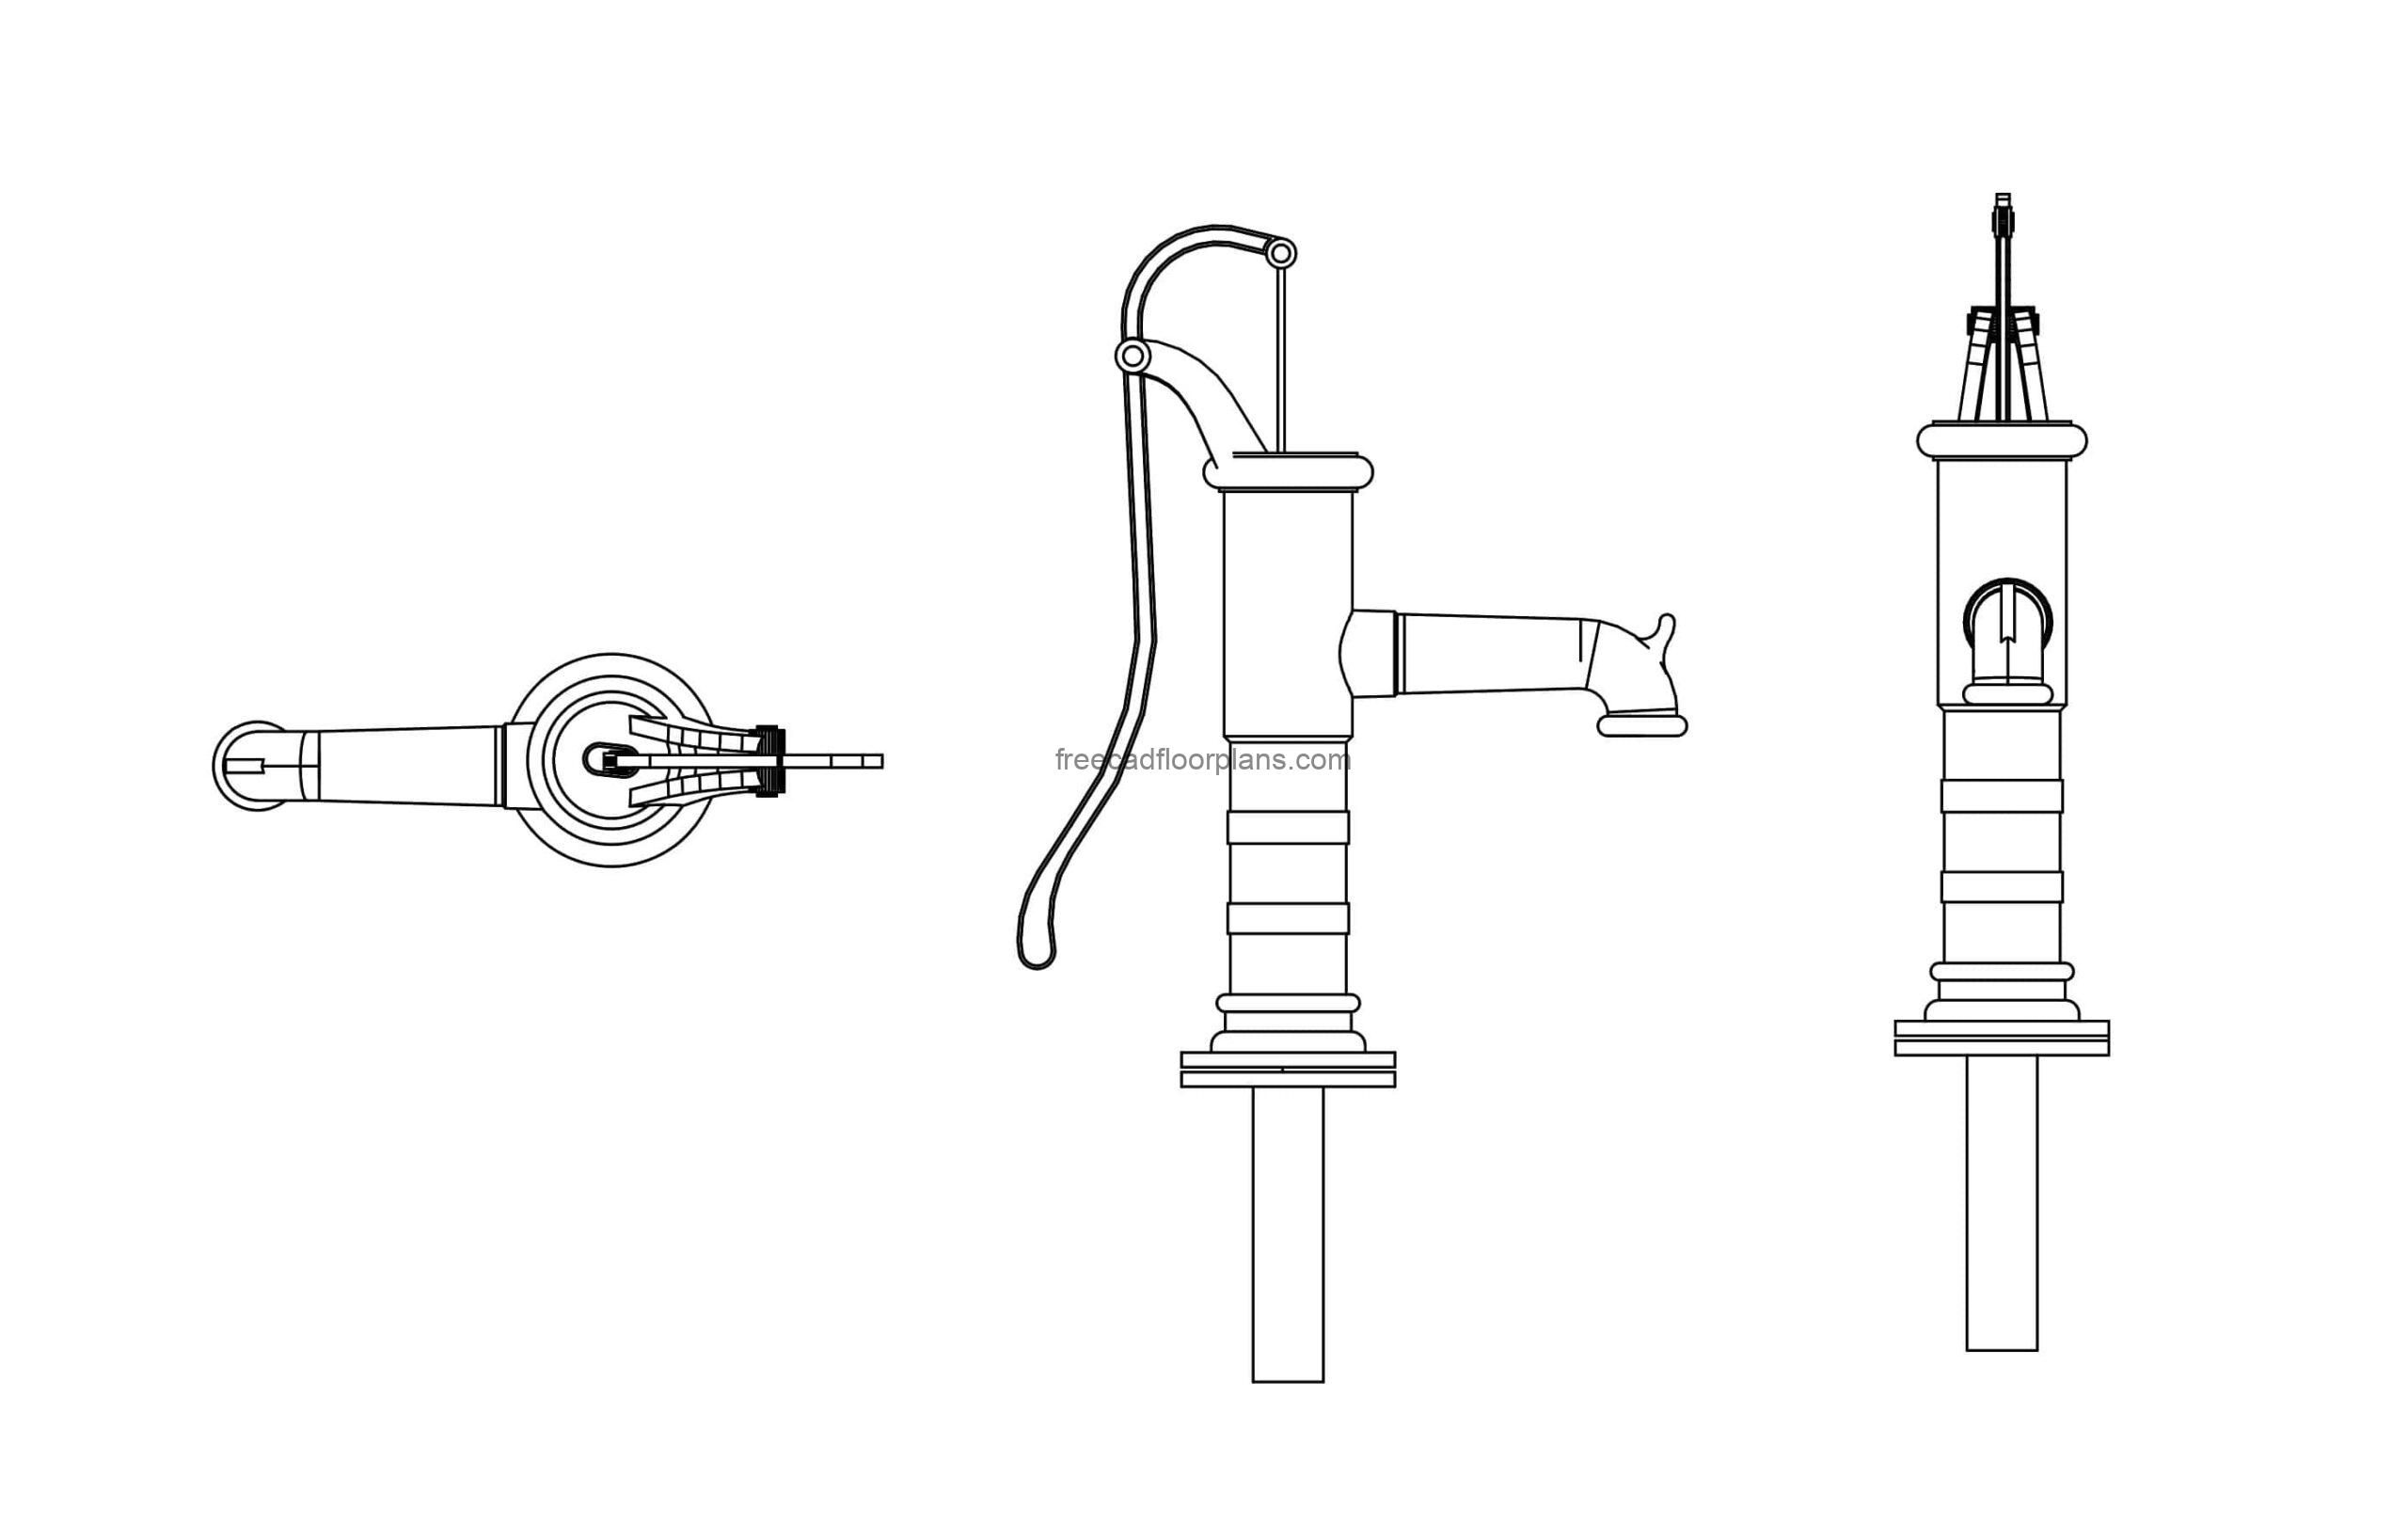 hand pump autocad drawing plan and elevations views, dwg format file for free download